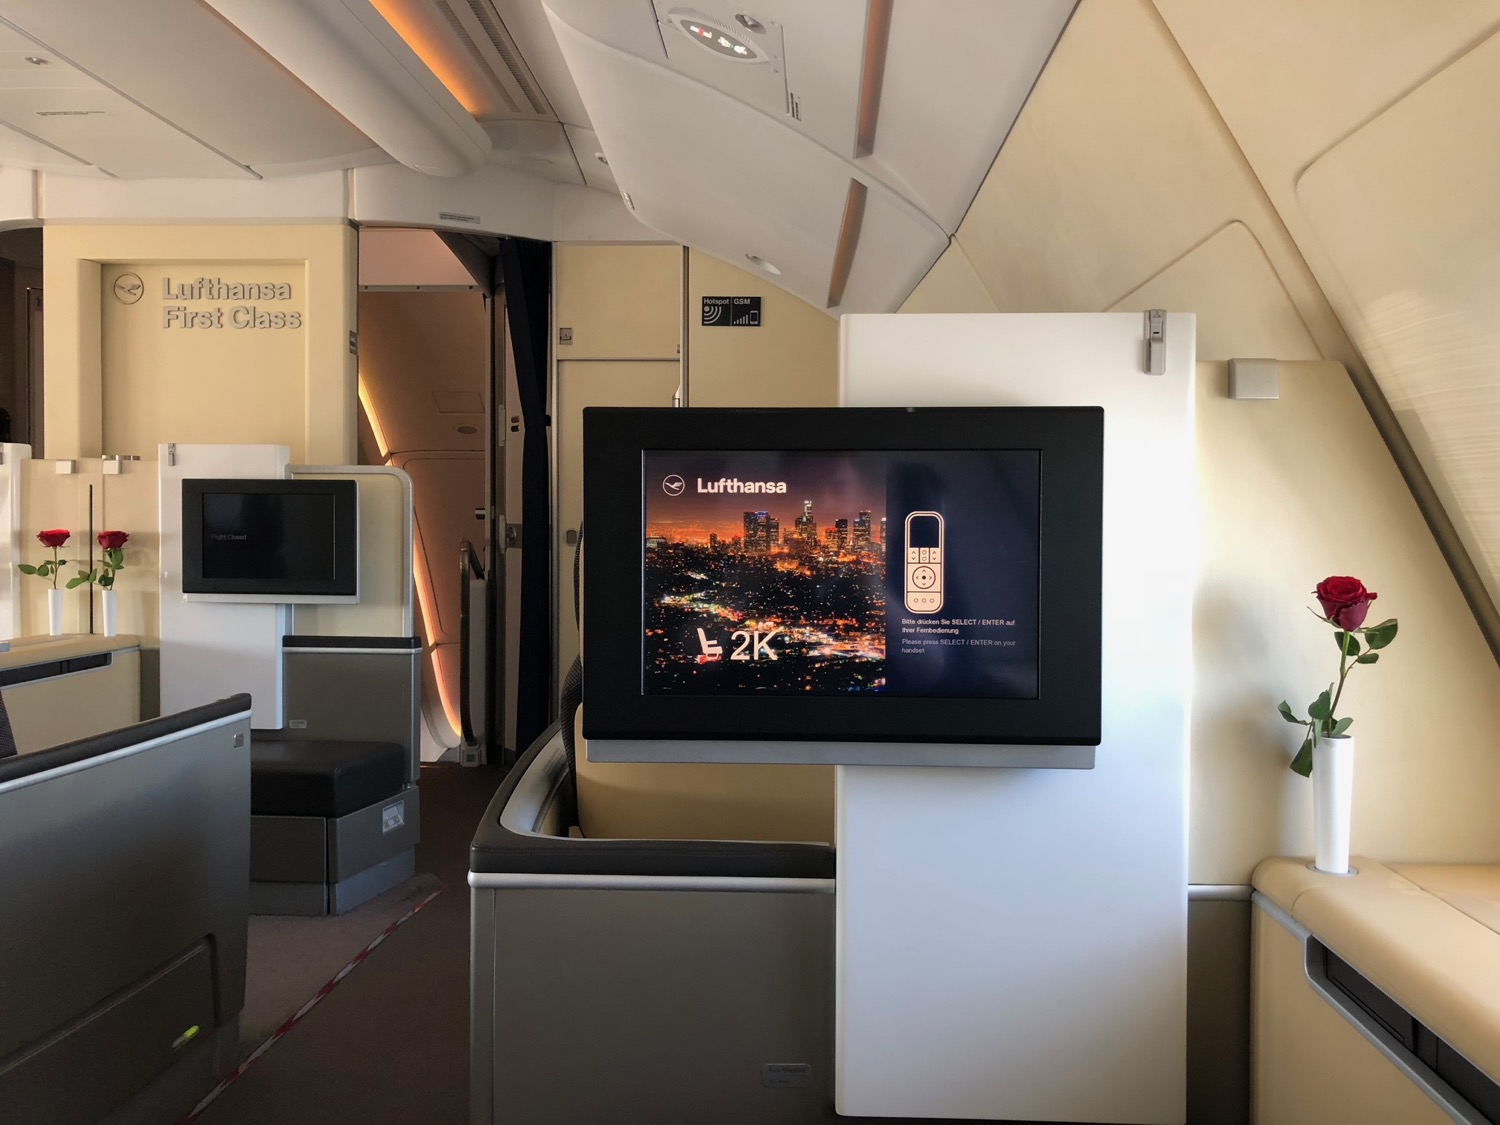 a tv on a stand in a plane